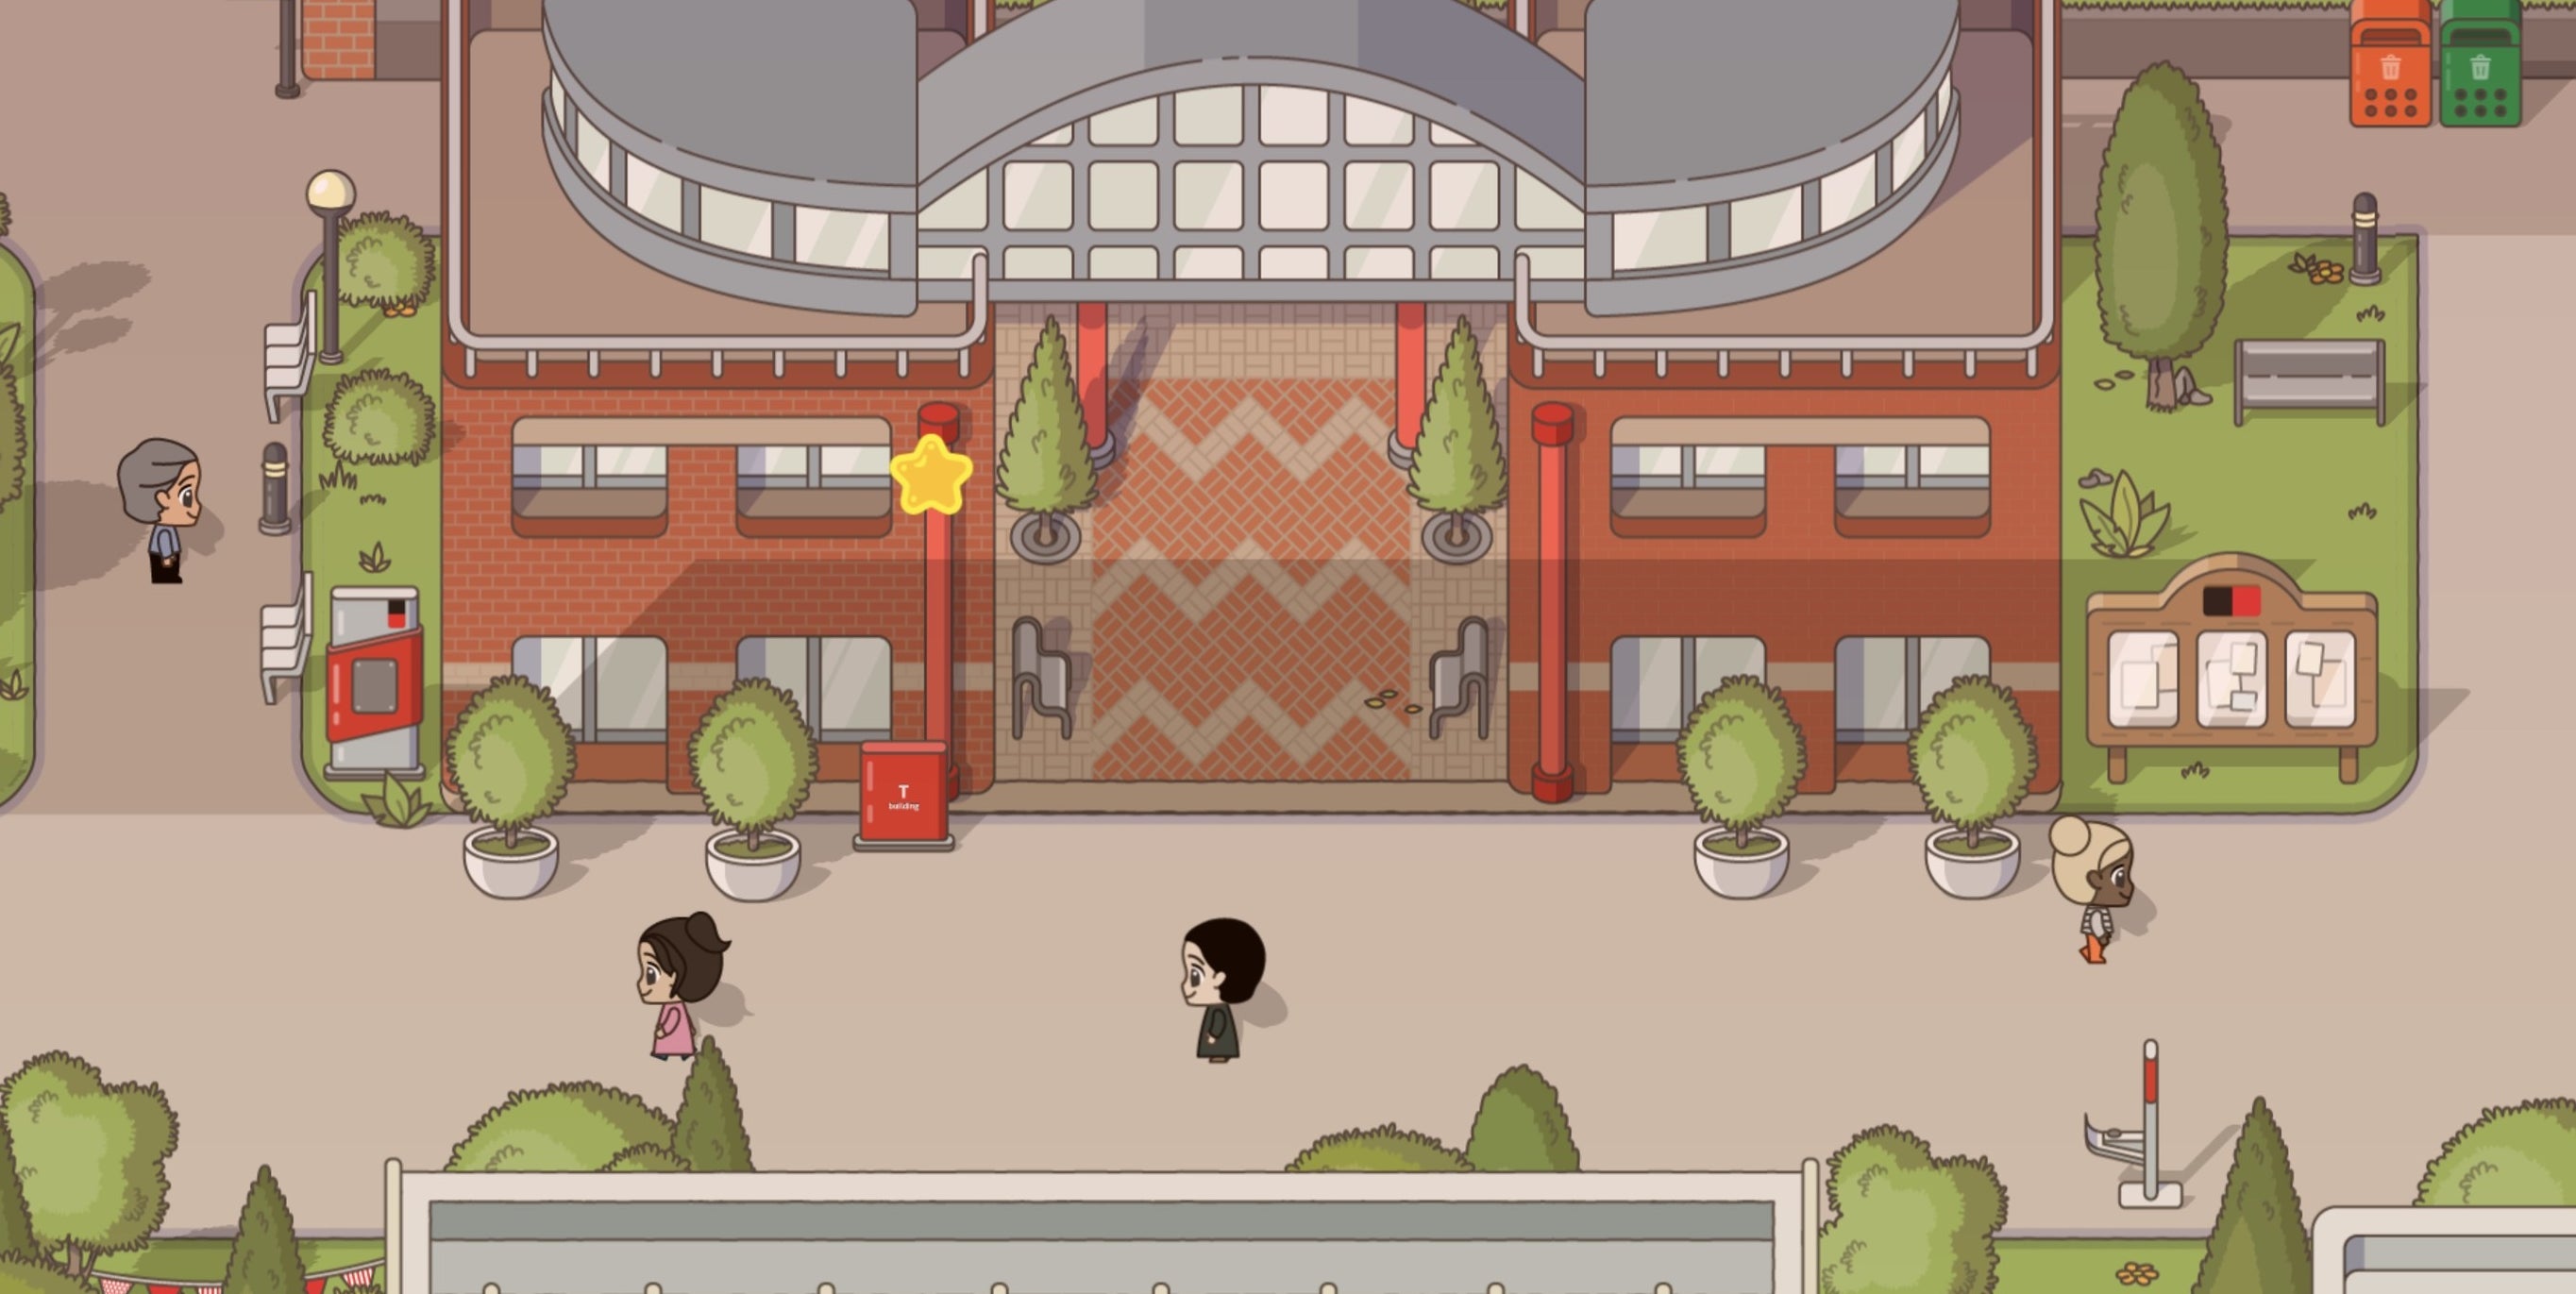 Characters in Swintopia walking outside an animated building with quad